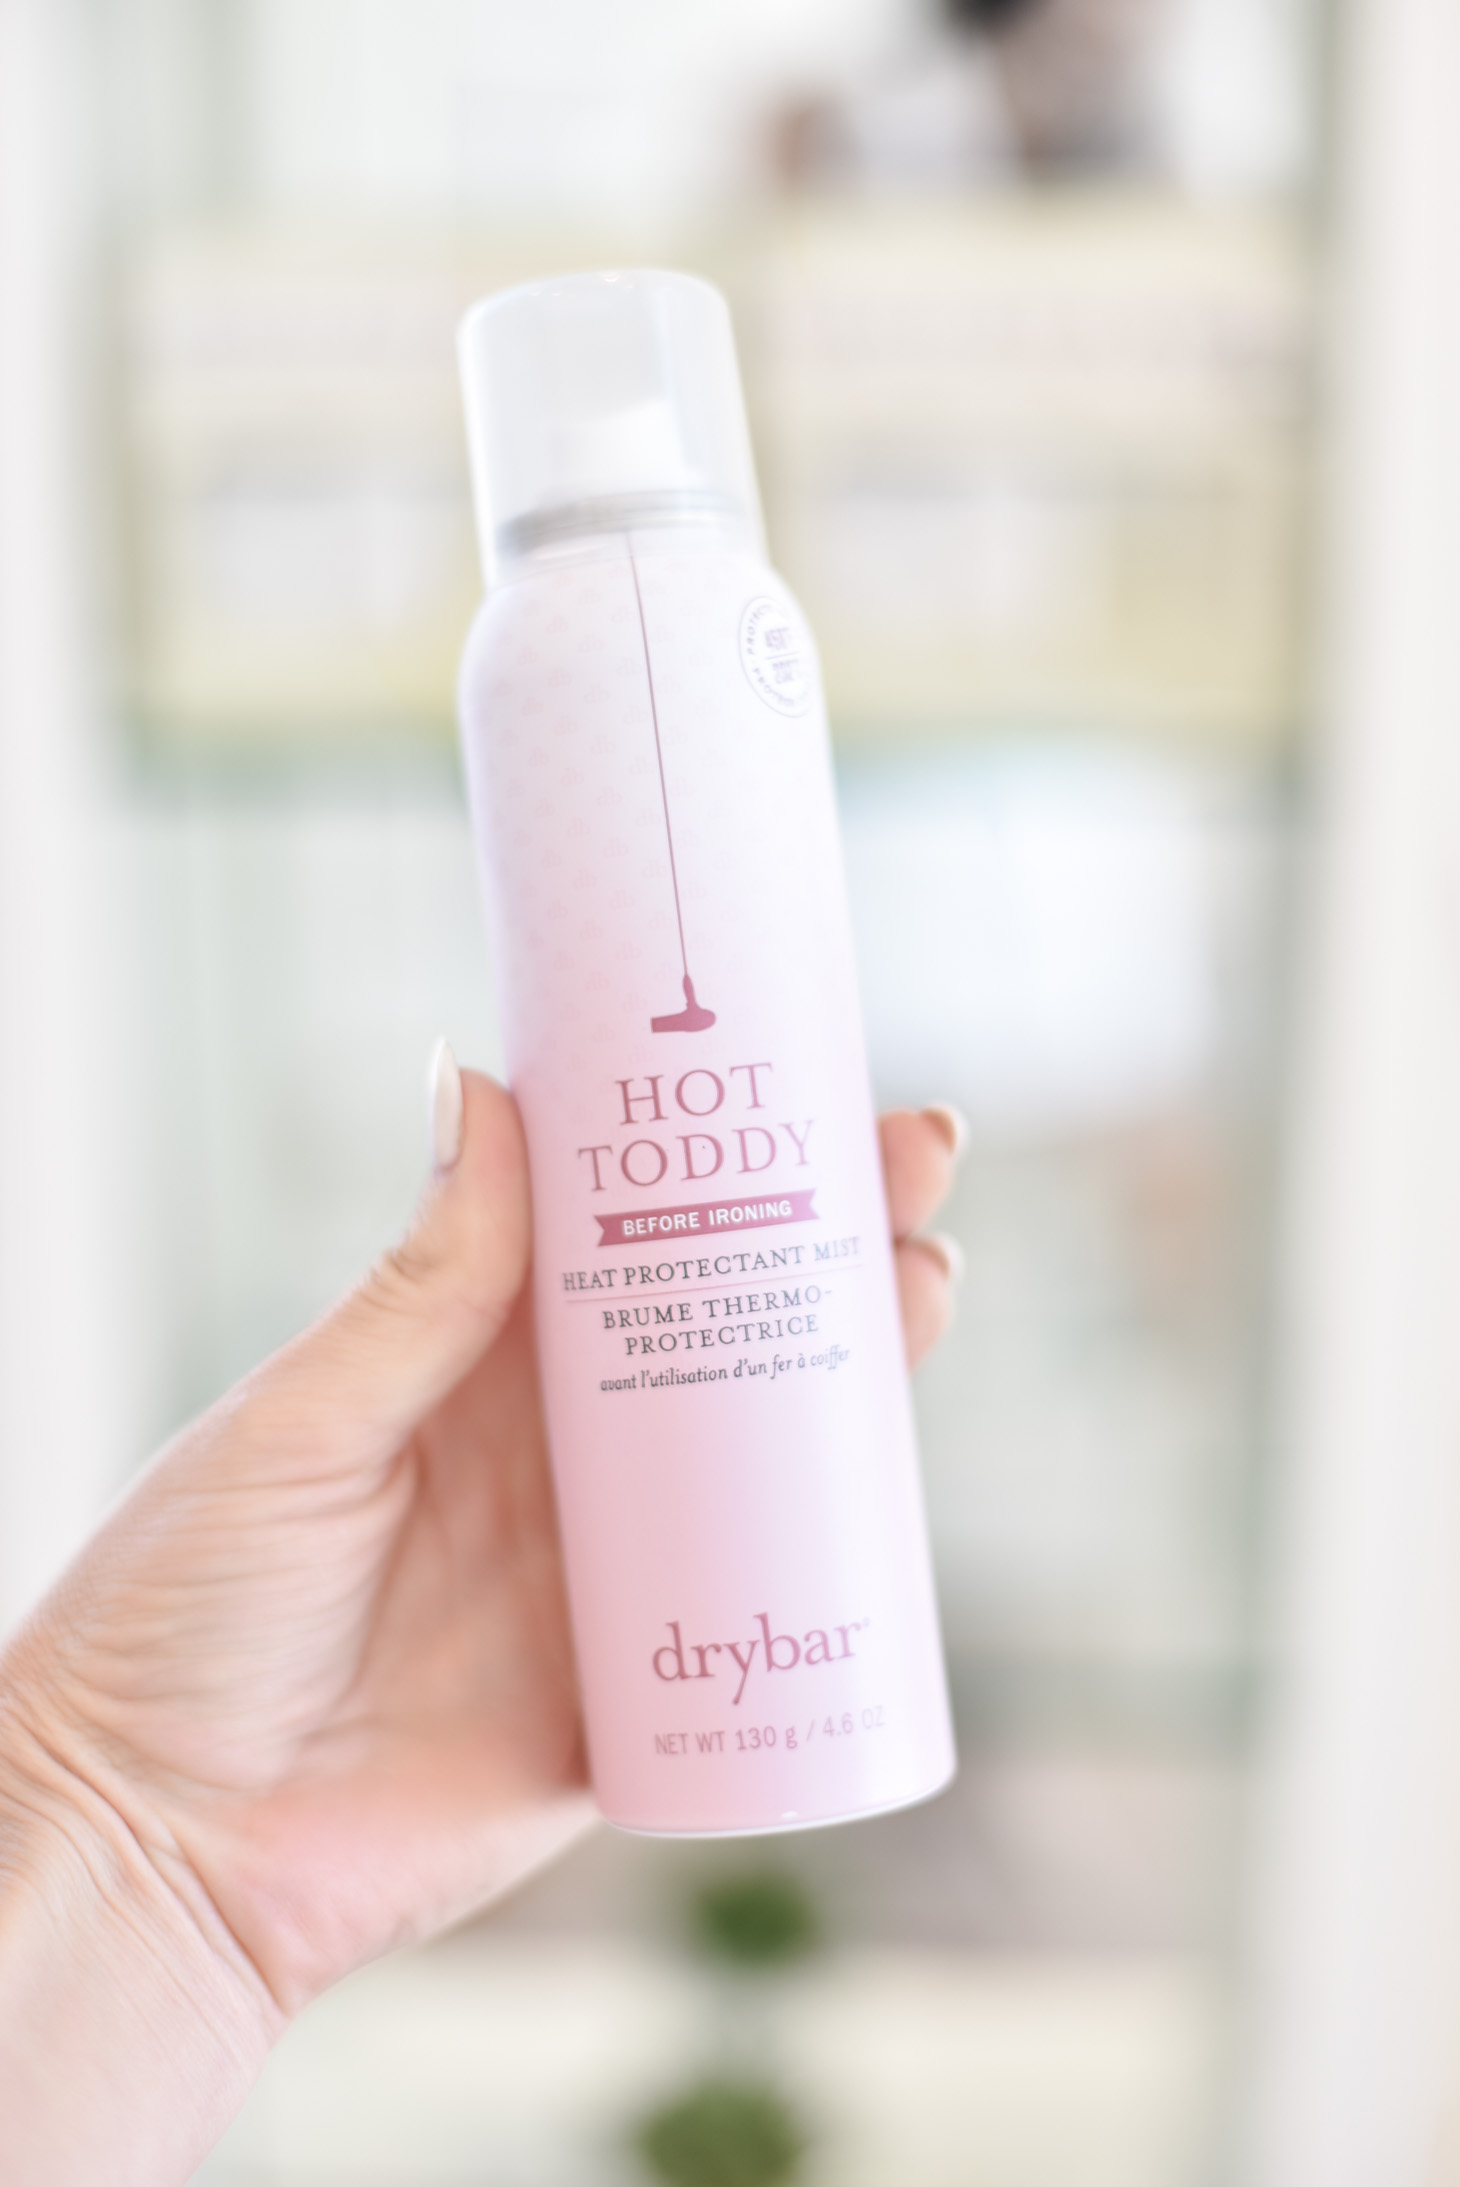 Erin Elizabeth of Wink and a Twirl shares the Drybar's latest product: the Hot Toddy Heat Protectant Mist